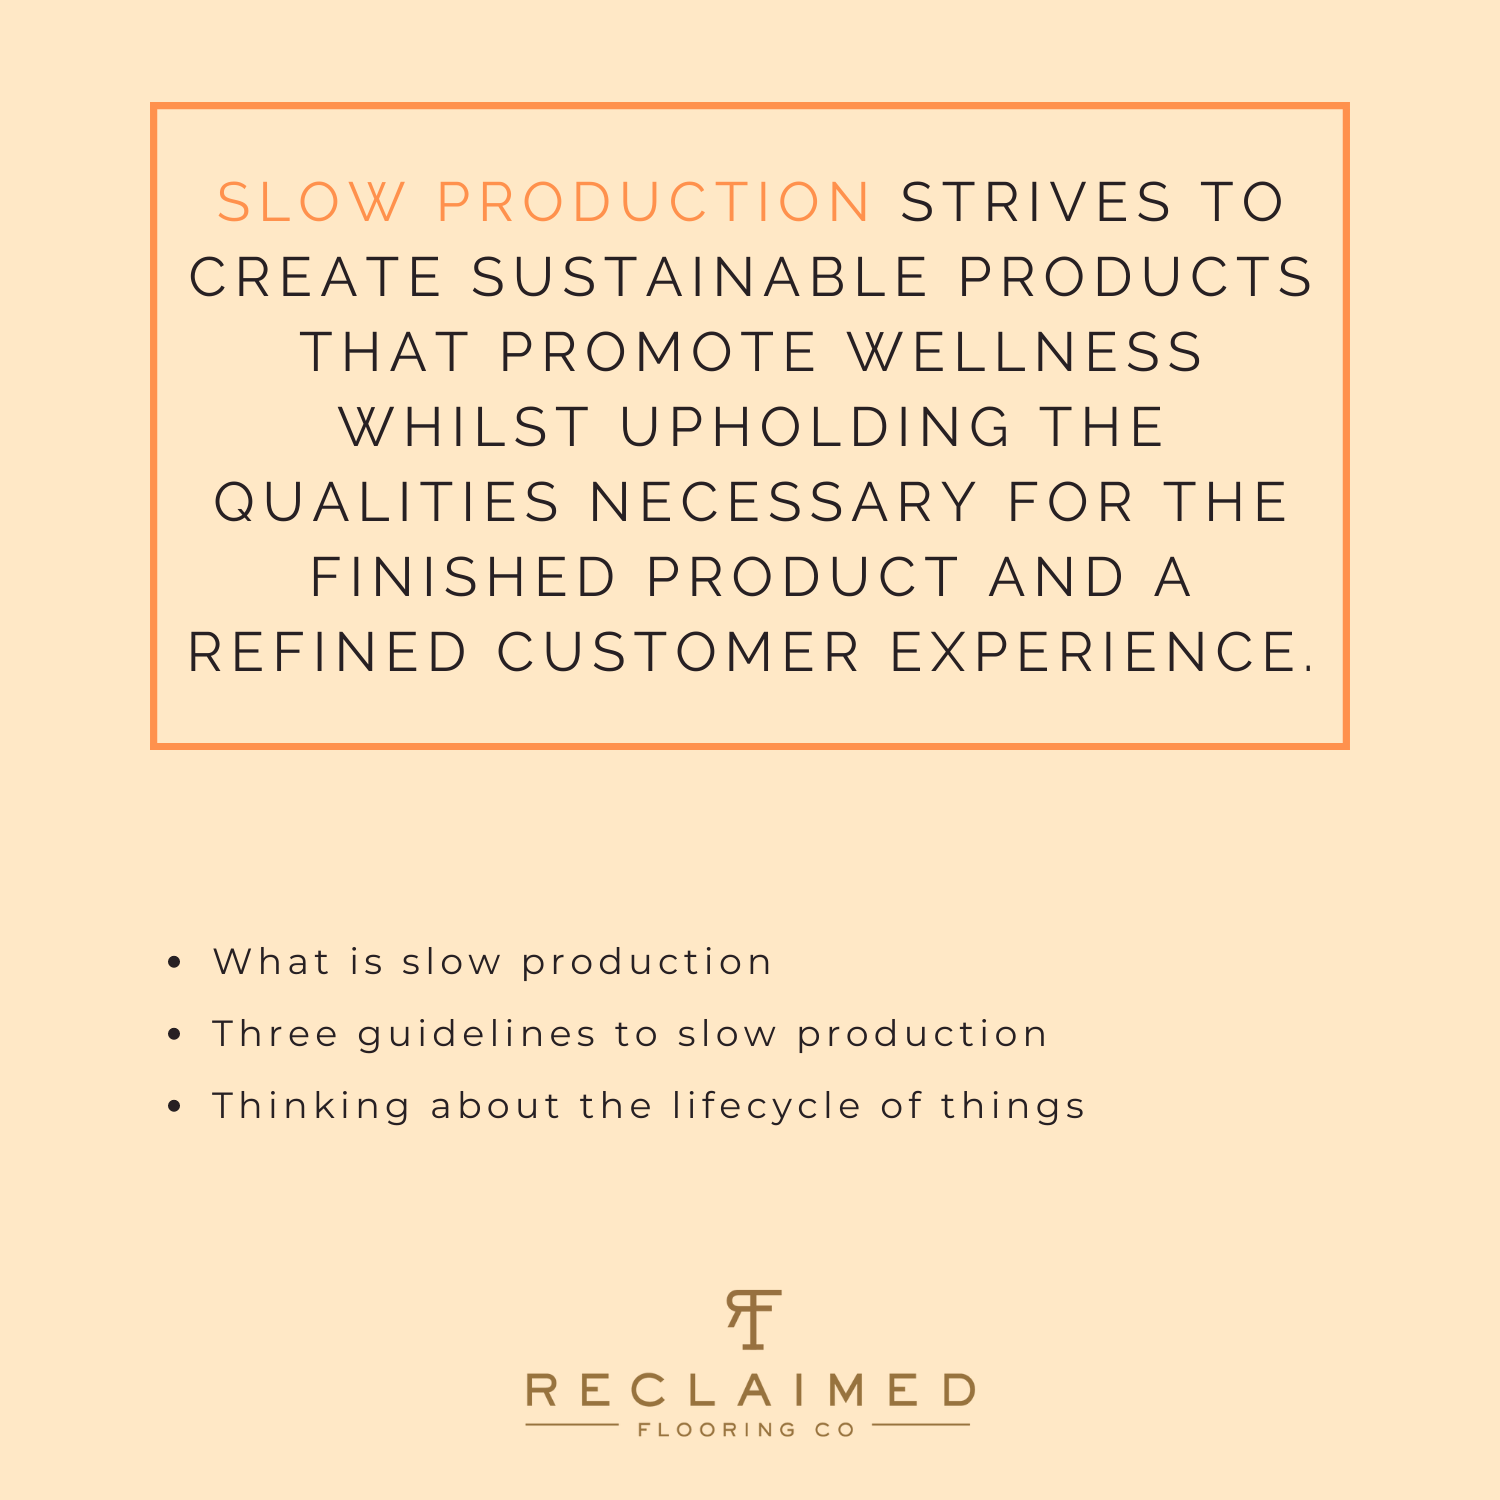 Slow production strives to create sustainable products that promote wellness whilst upholding the qualities necessary for the finished product and a refined customer experience.